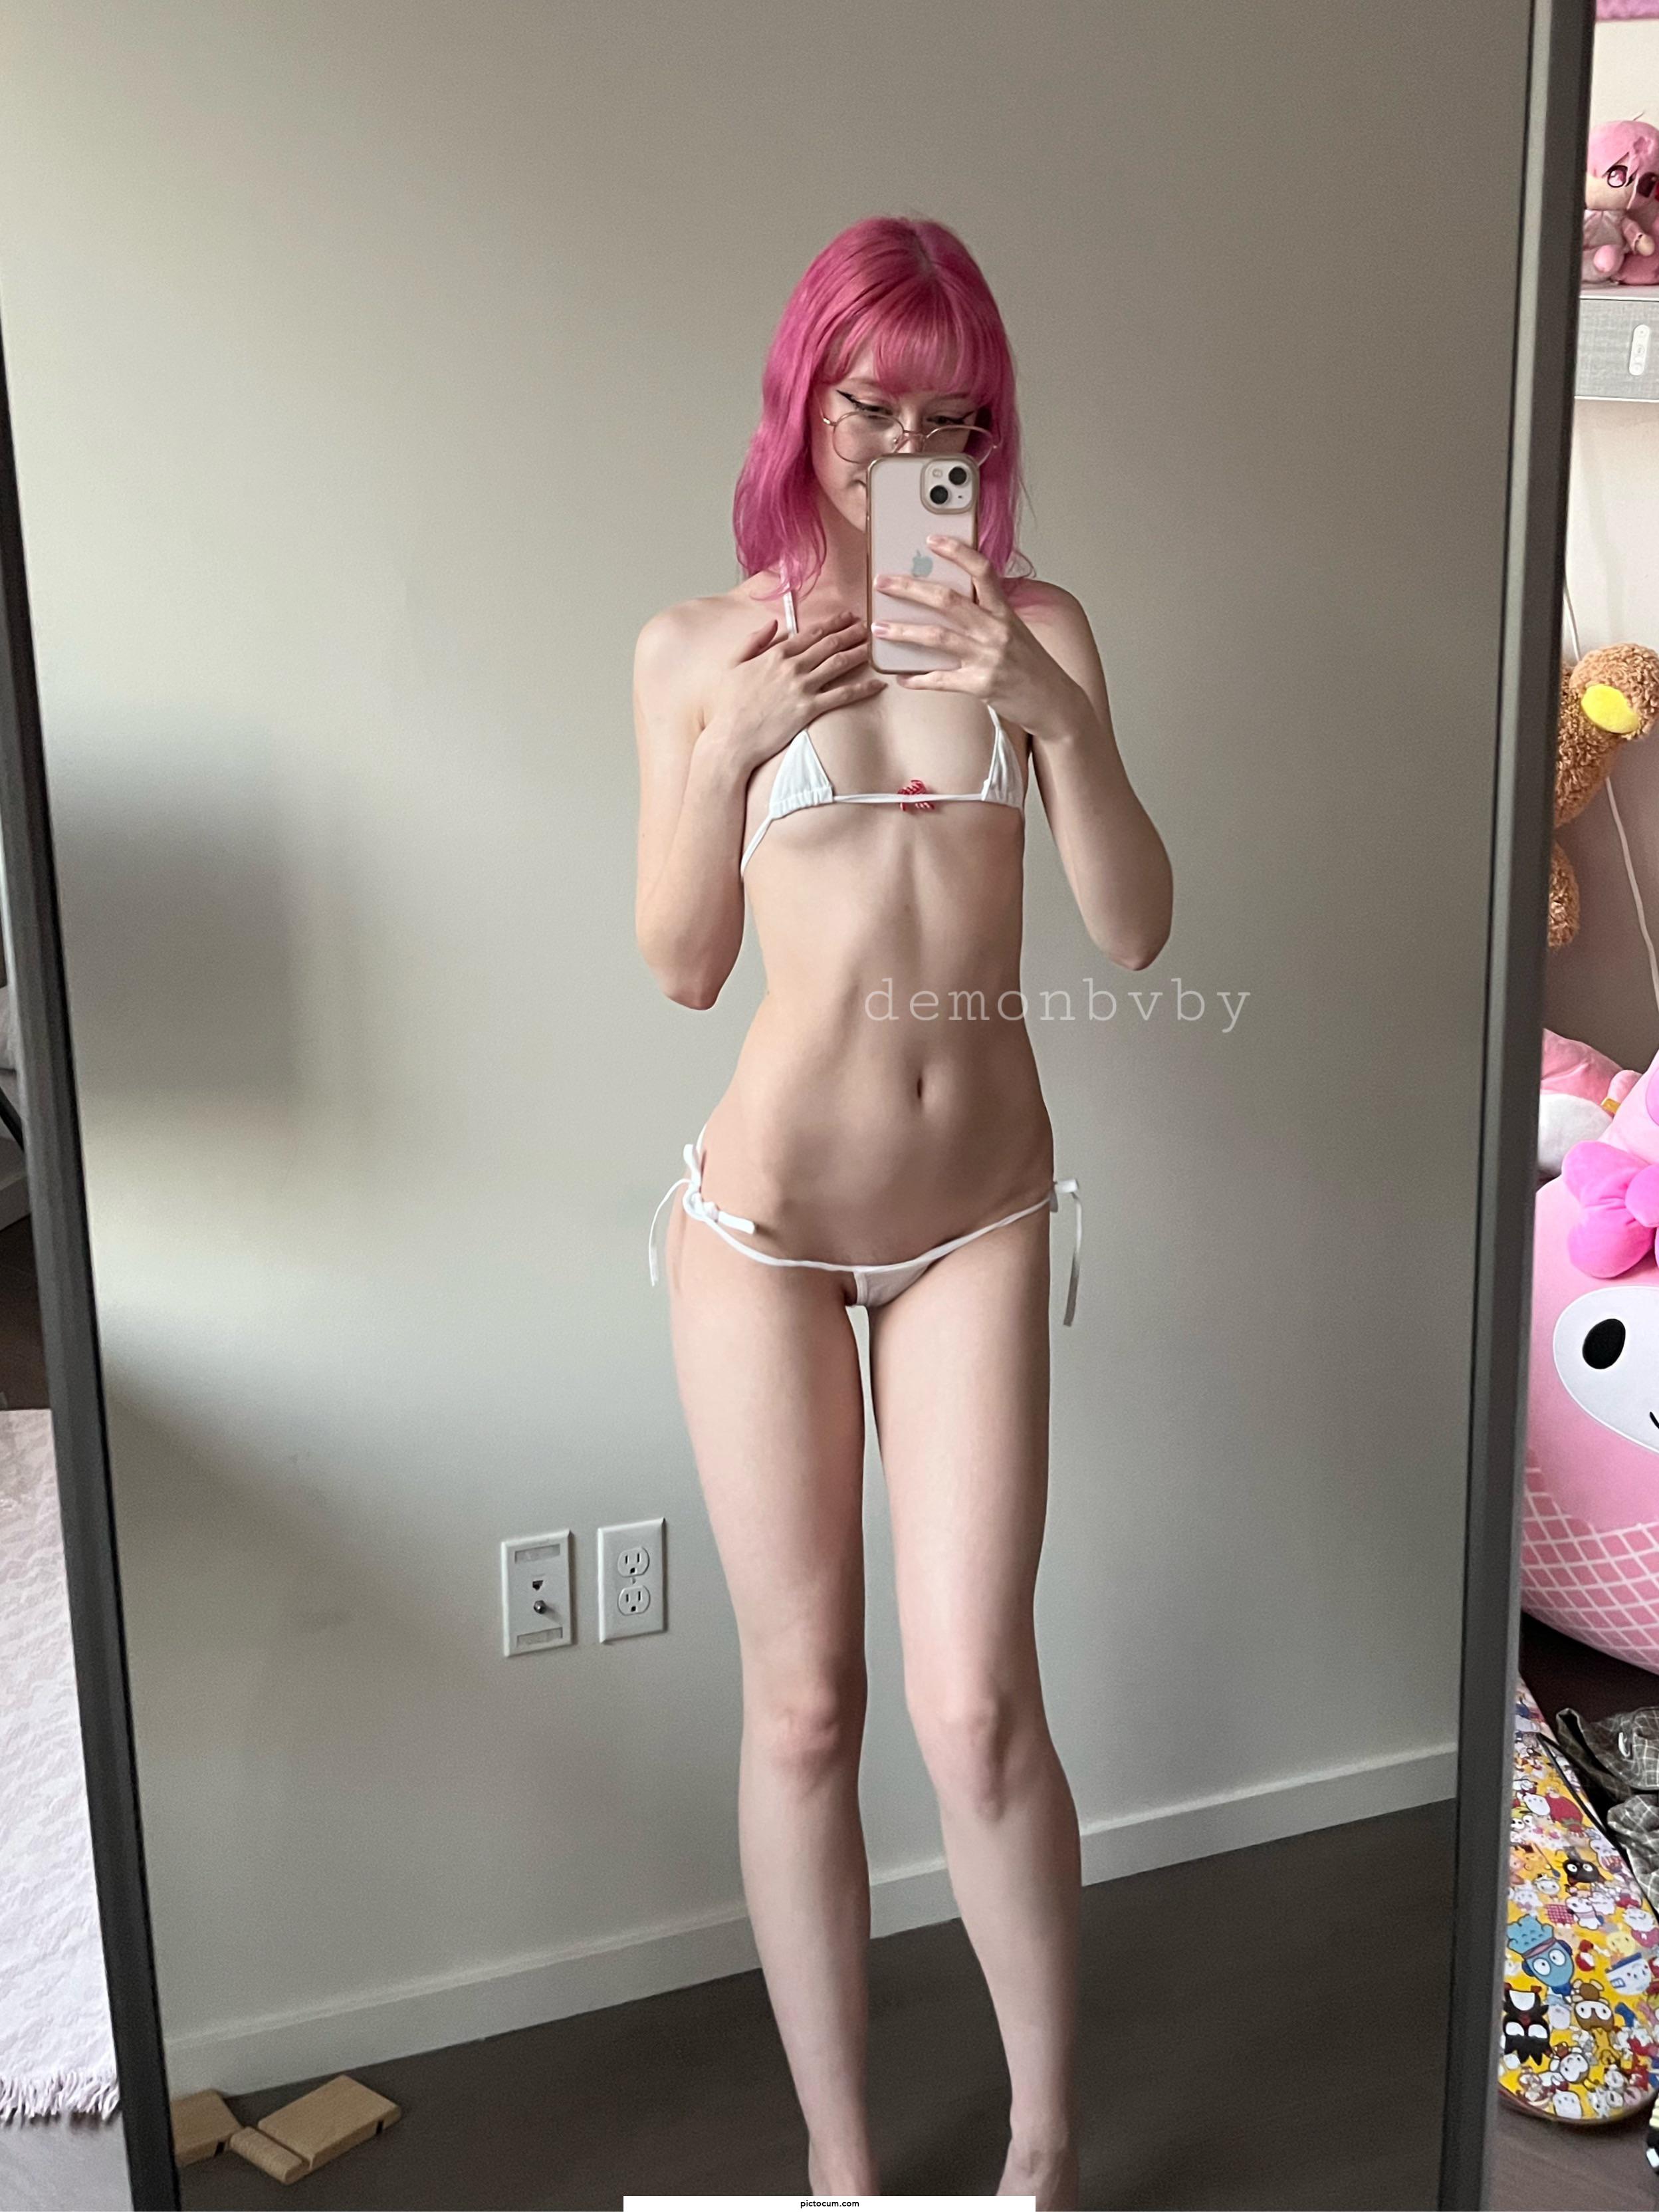 Only the tiniest bikinis for my little body!